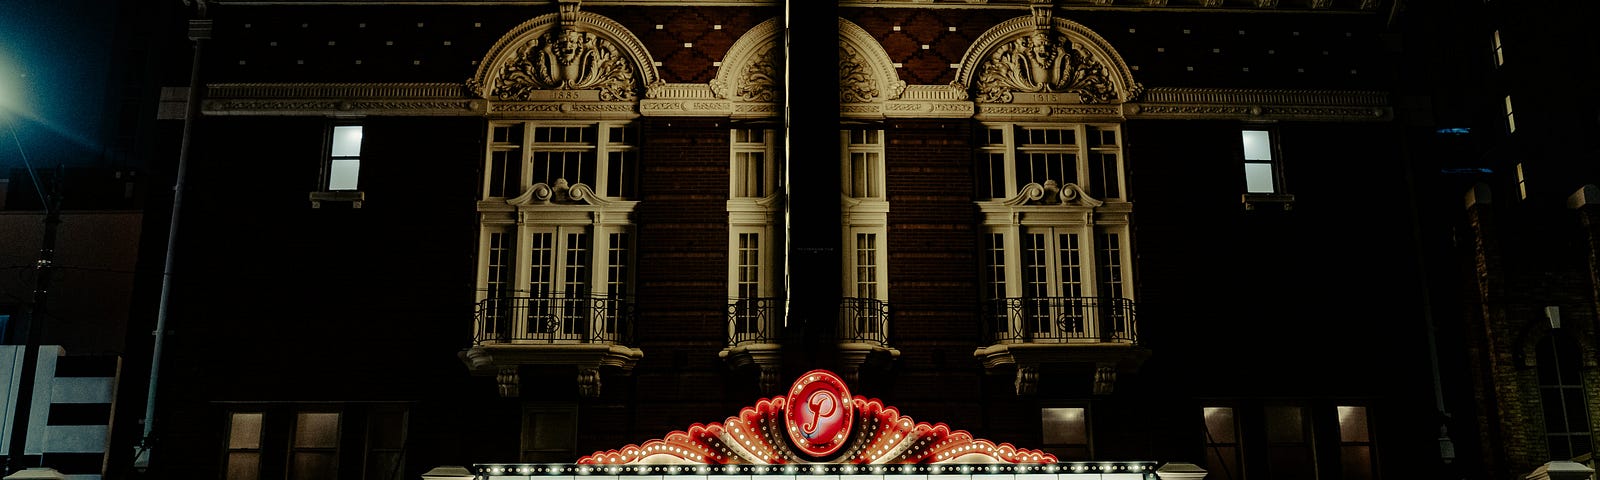 The front of the Paramount Theatre House (Austin, TX), with a marquis lit up in red, white, and black. The letters on the marquis read: “In order for us to be all together, for now we must remain apart.”